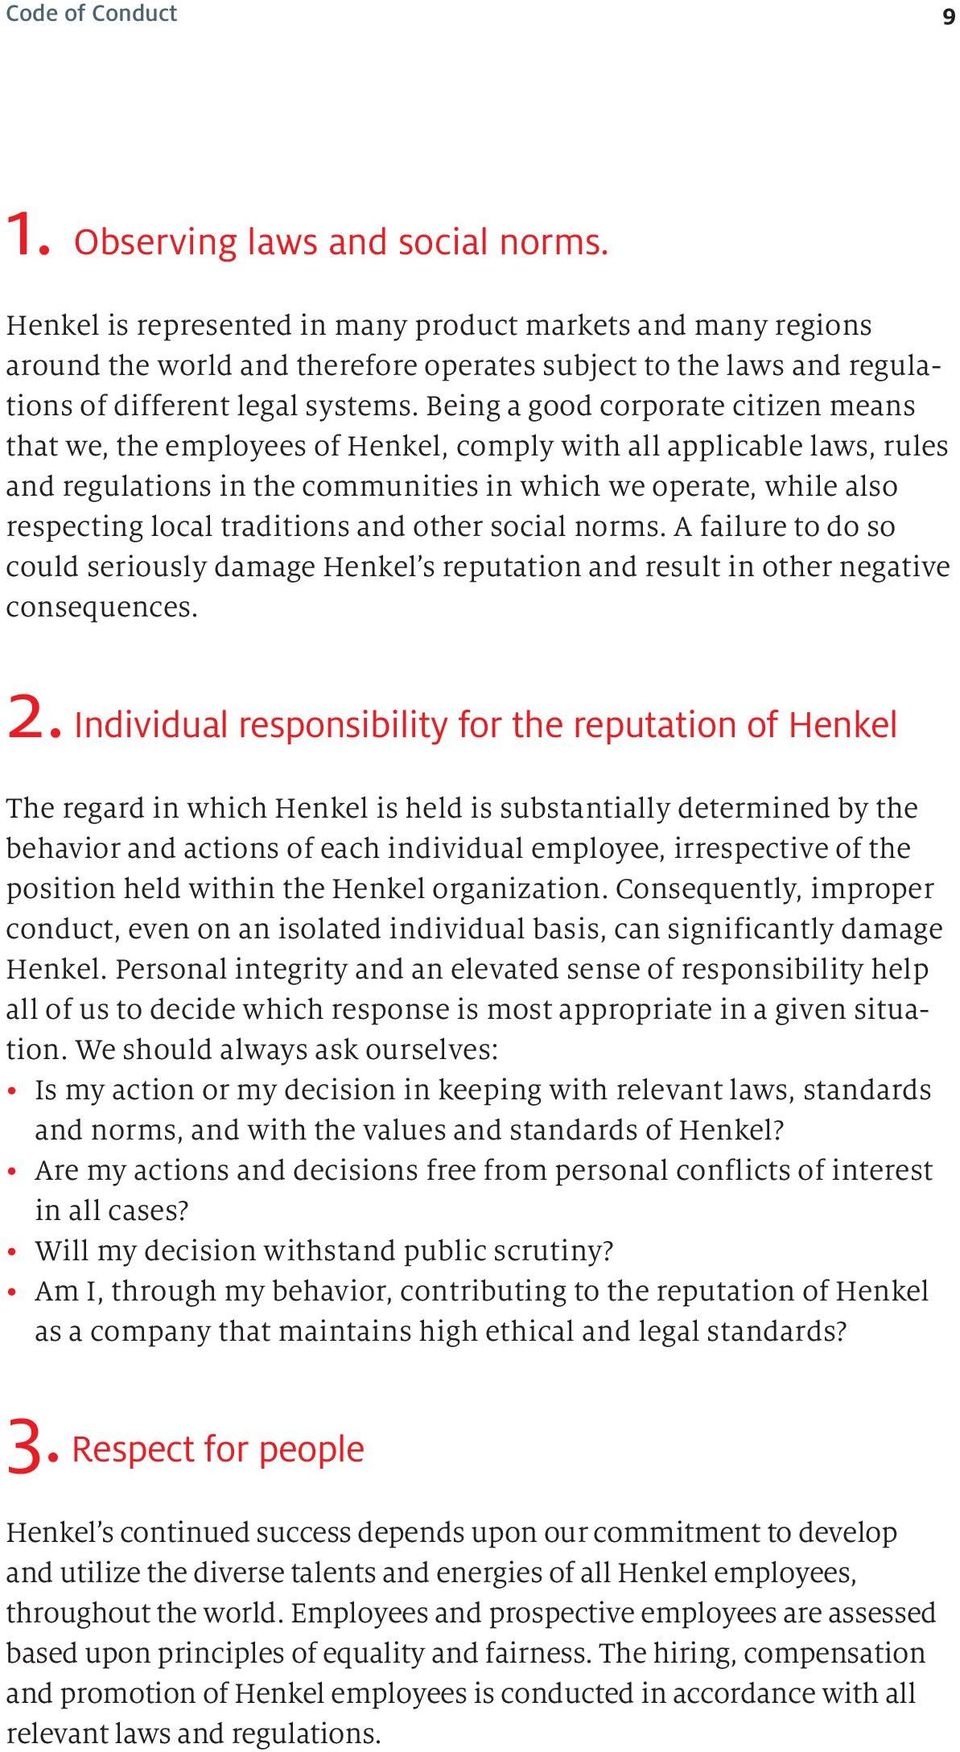 Being a good corporate citizen means that we, the employees of Henkel, comply with all applicable laws, rules and regulations in the communities in which we operate, while also respecting local